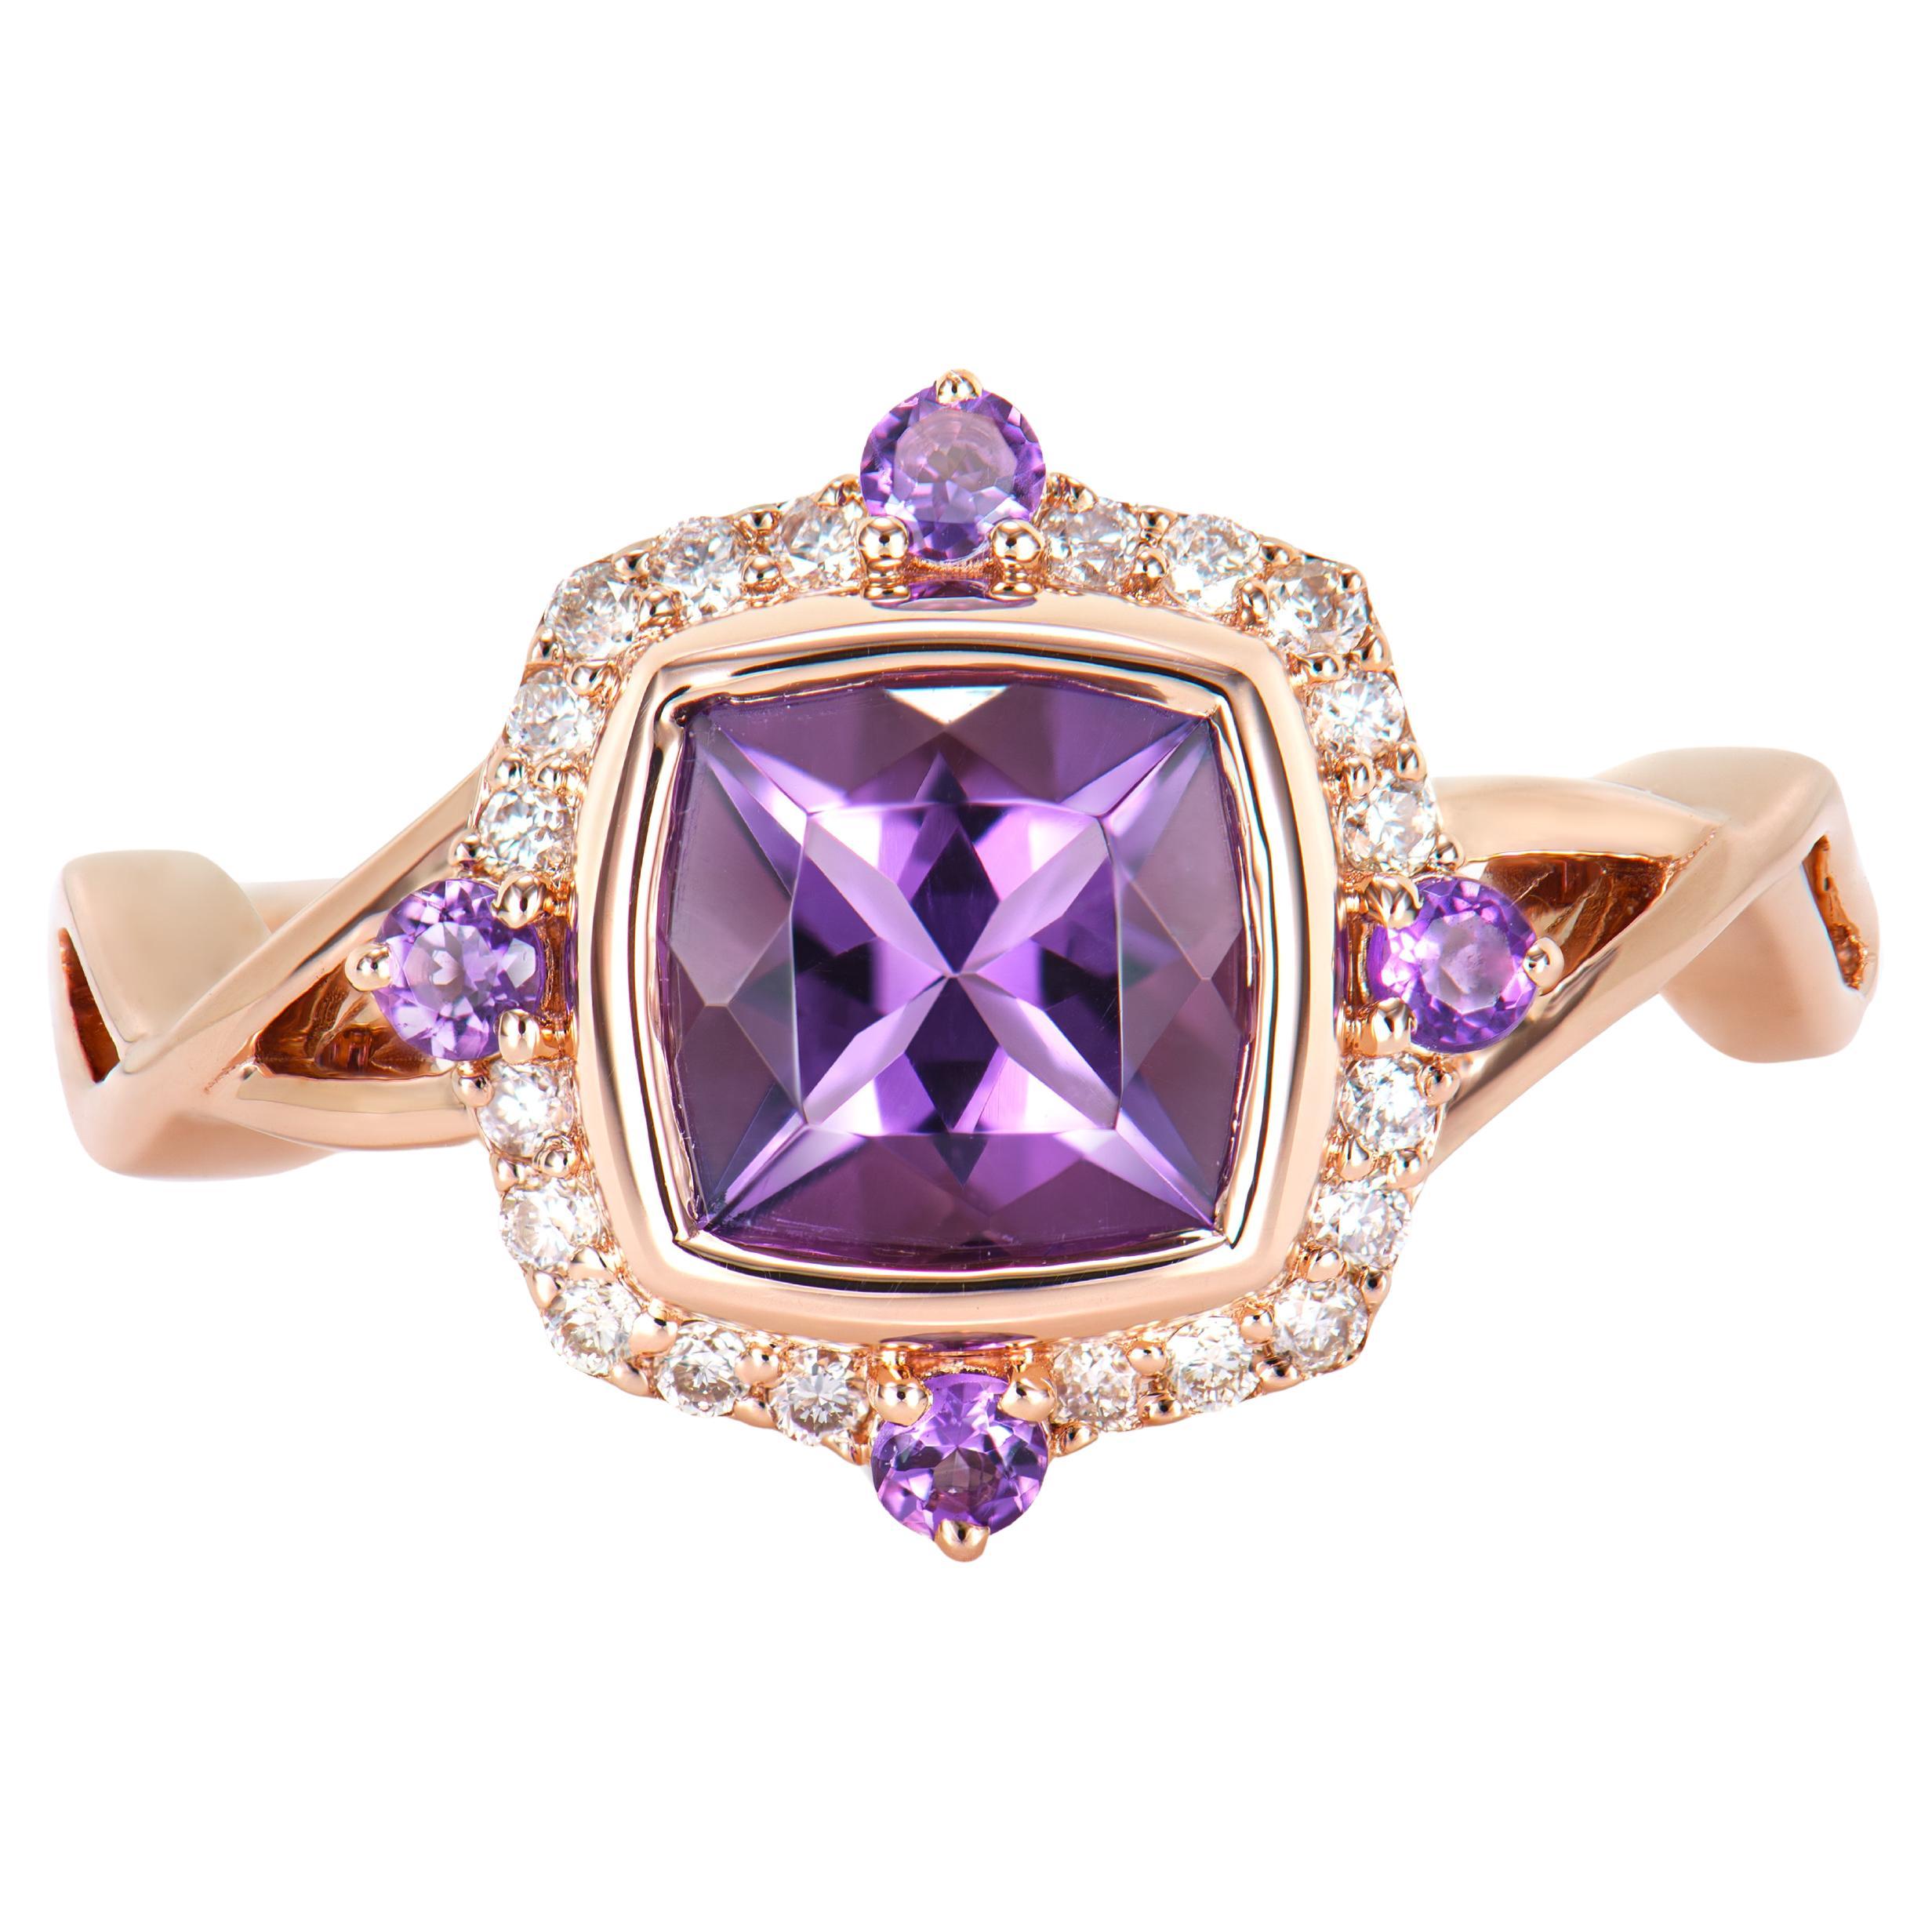 1.22 Carat Amethyst Fancy Ring in 14Karat Rose Gold with White Diamond.   For Sale